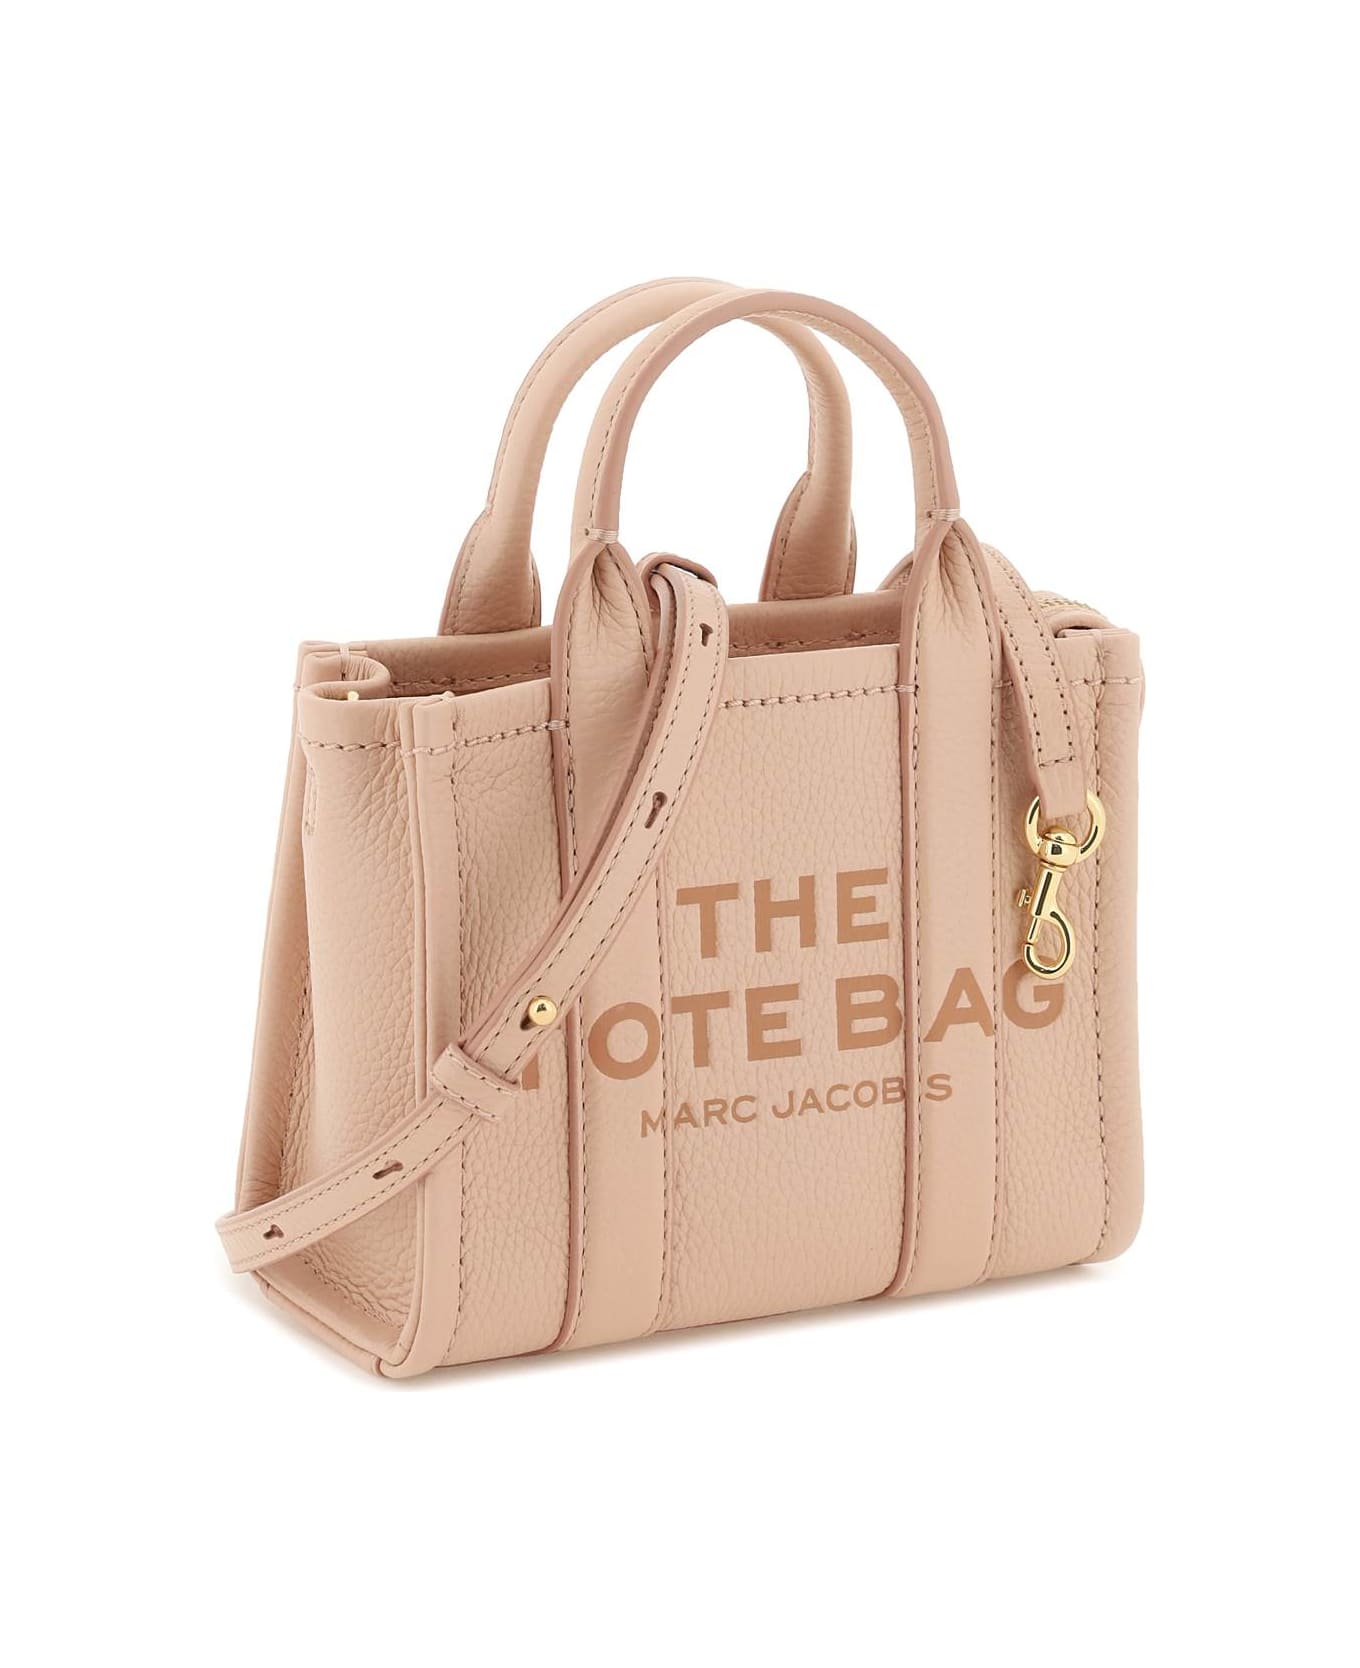 Marc Jacobs The Leather Micro Tote Bag - Rose トートバッグ